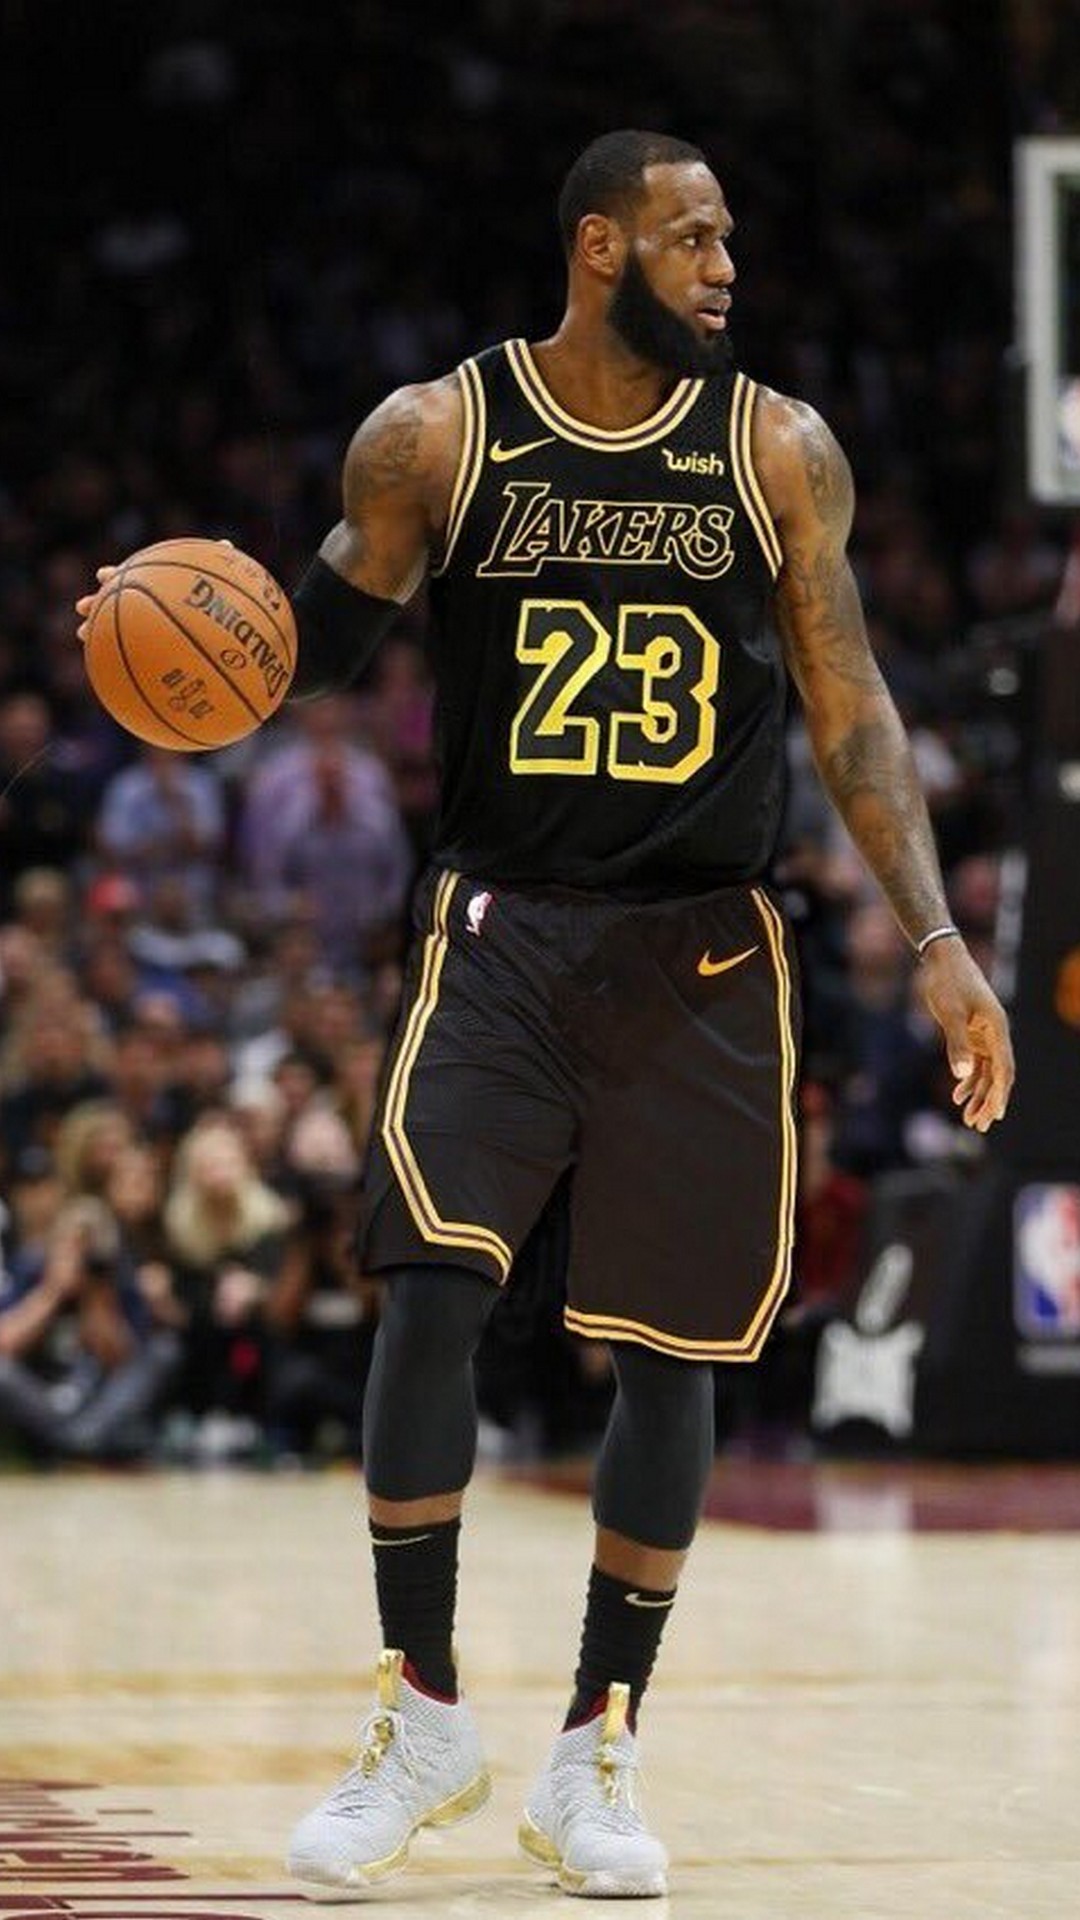 Lebron James La Lakers Iphone 6 Wallpaper With High-resolution - Lebron James Lakers Black Jersey - HD Wallpaper 